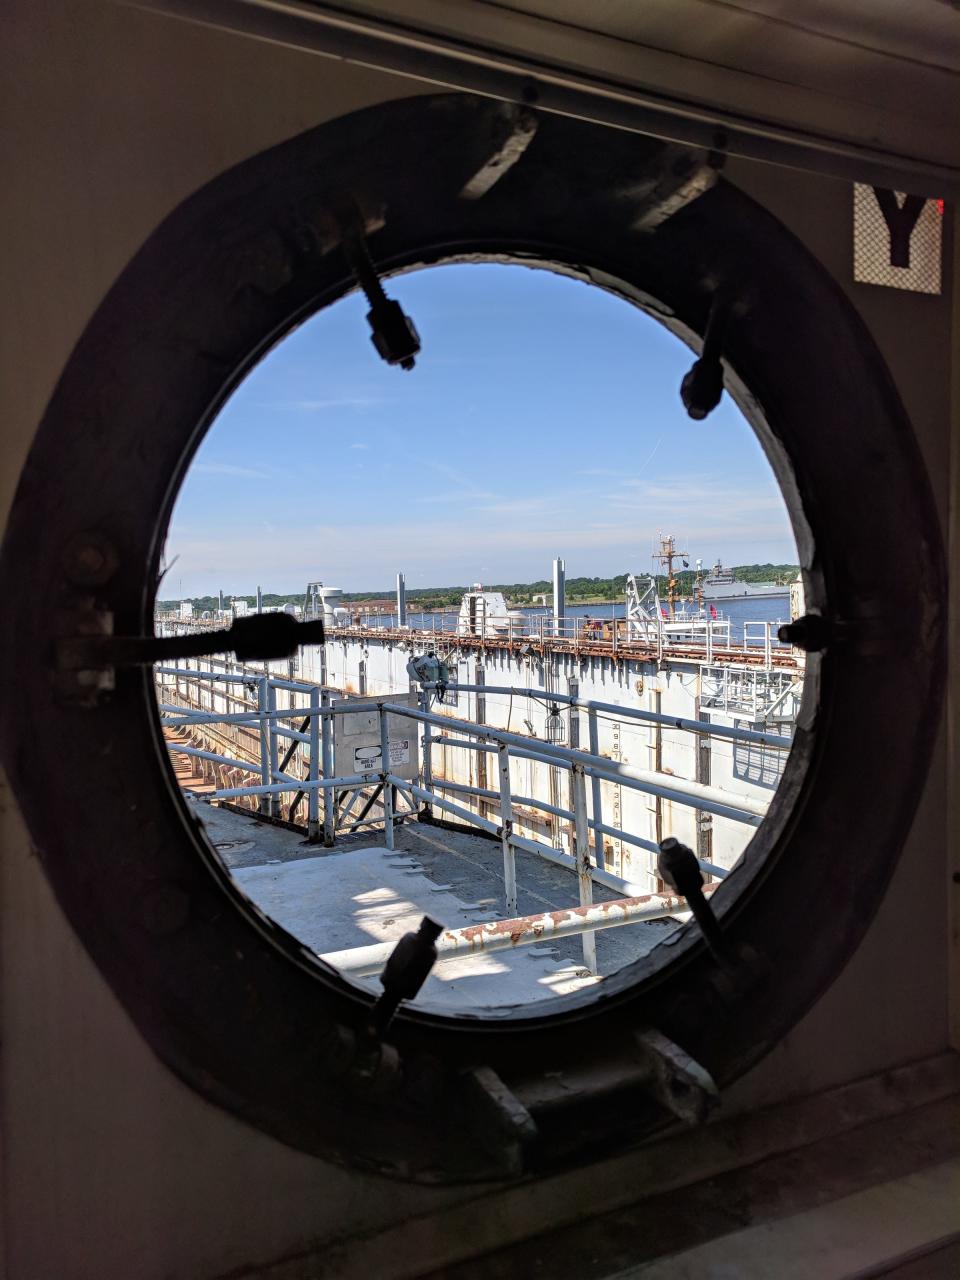 Looking through our porthole at the dock of the USS OAK RIDGE, which will be displayed in Oak Ridge, Tennessee.